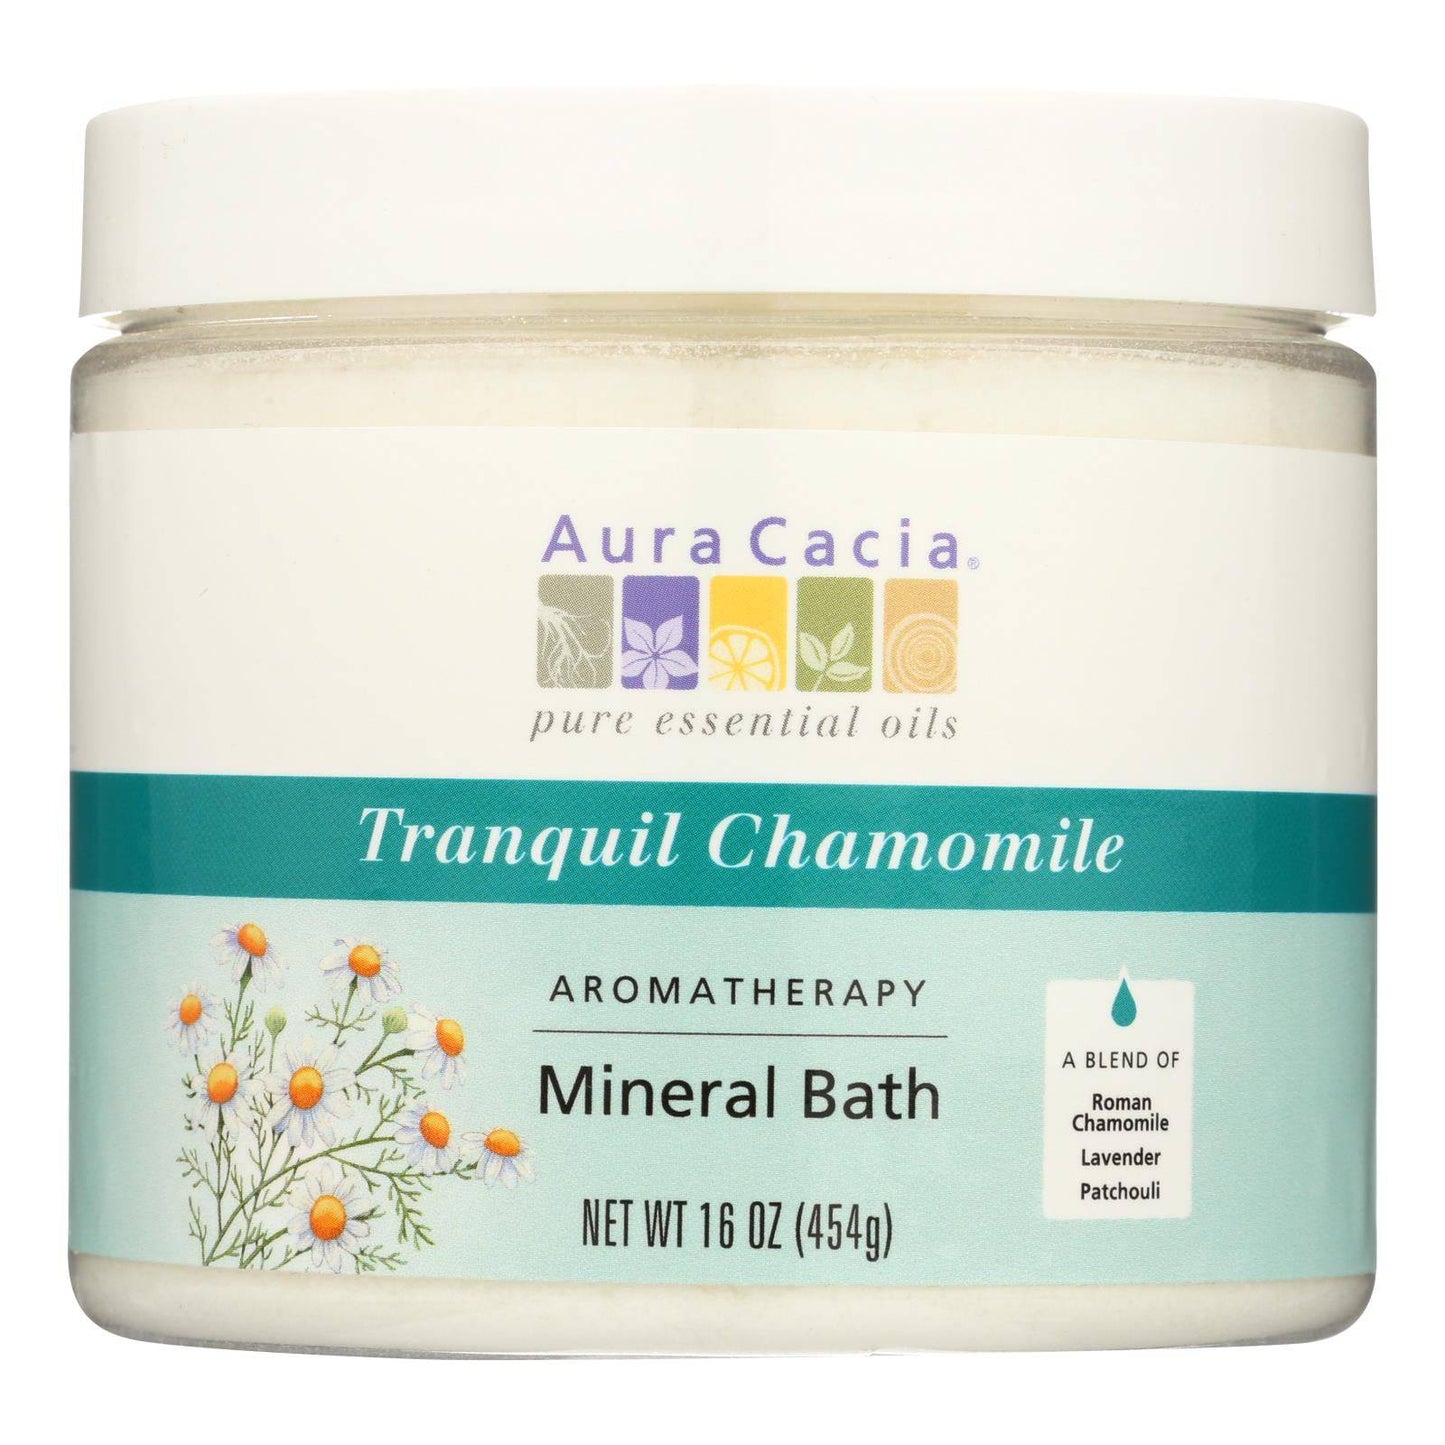 Buy Aura Cacia - Aromatherapy Mineral Bath Tranquility Chamomile - 16 Oz  at OnlyNaturals.us